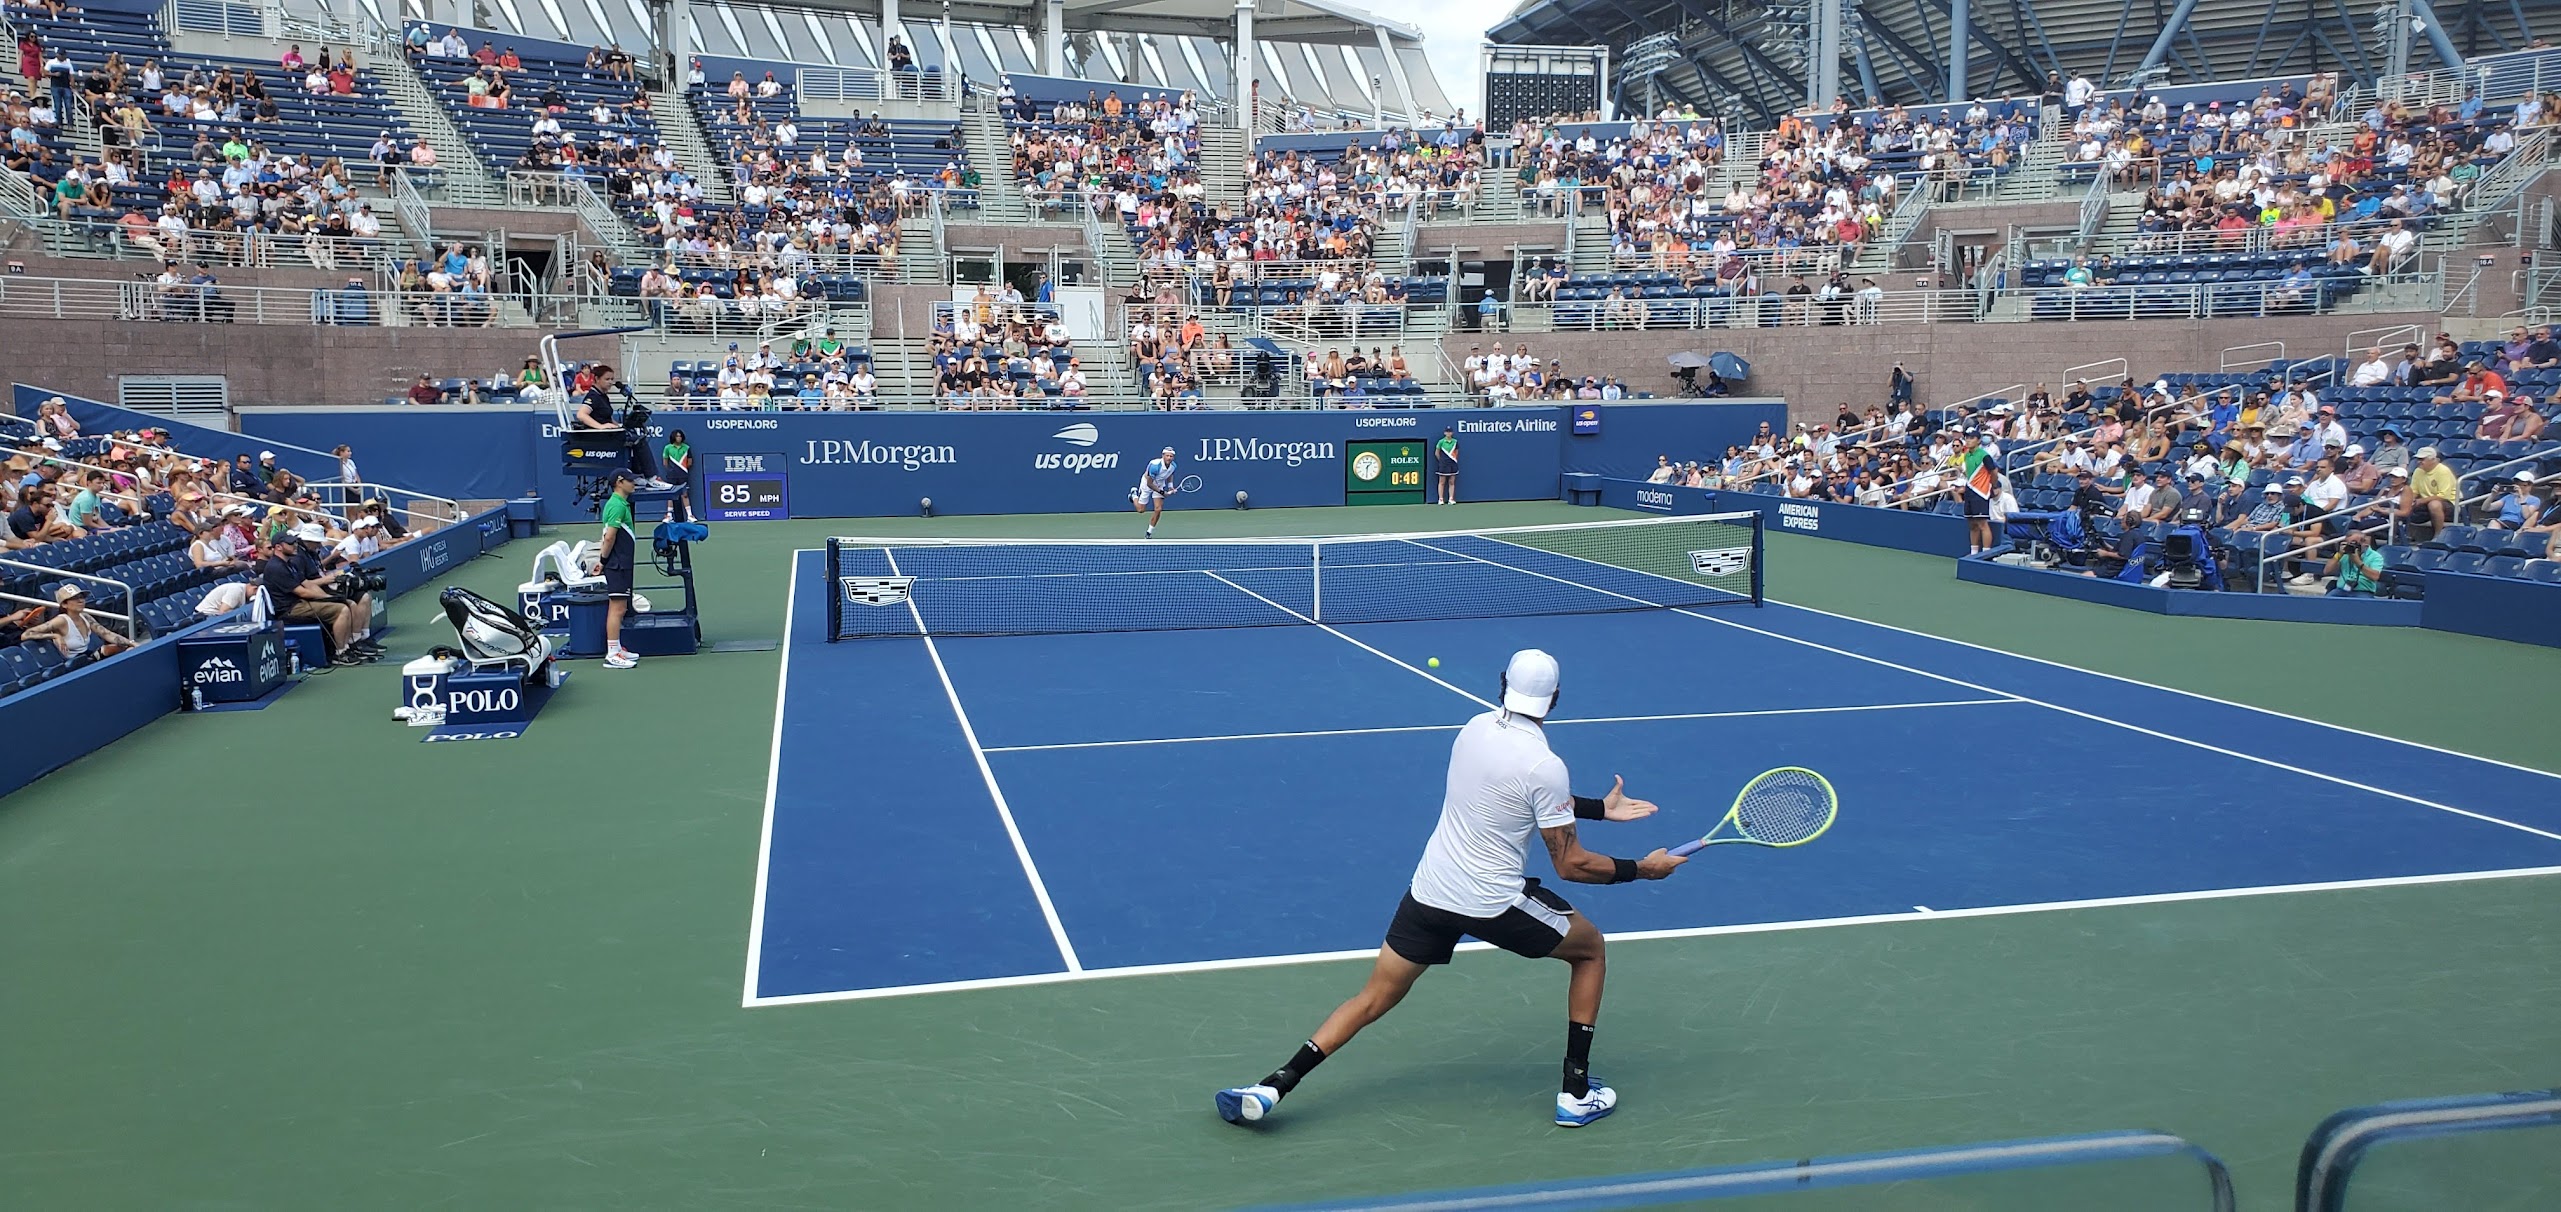 Tennis Bargains US Open Tennis Deals and Reviews How to sit front row at the US Open